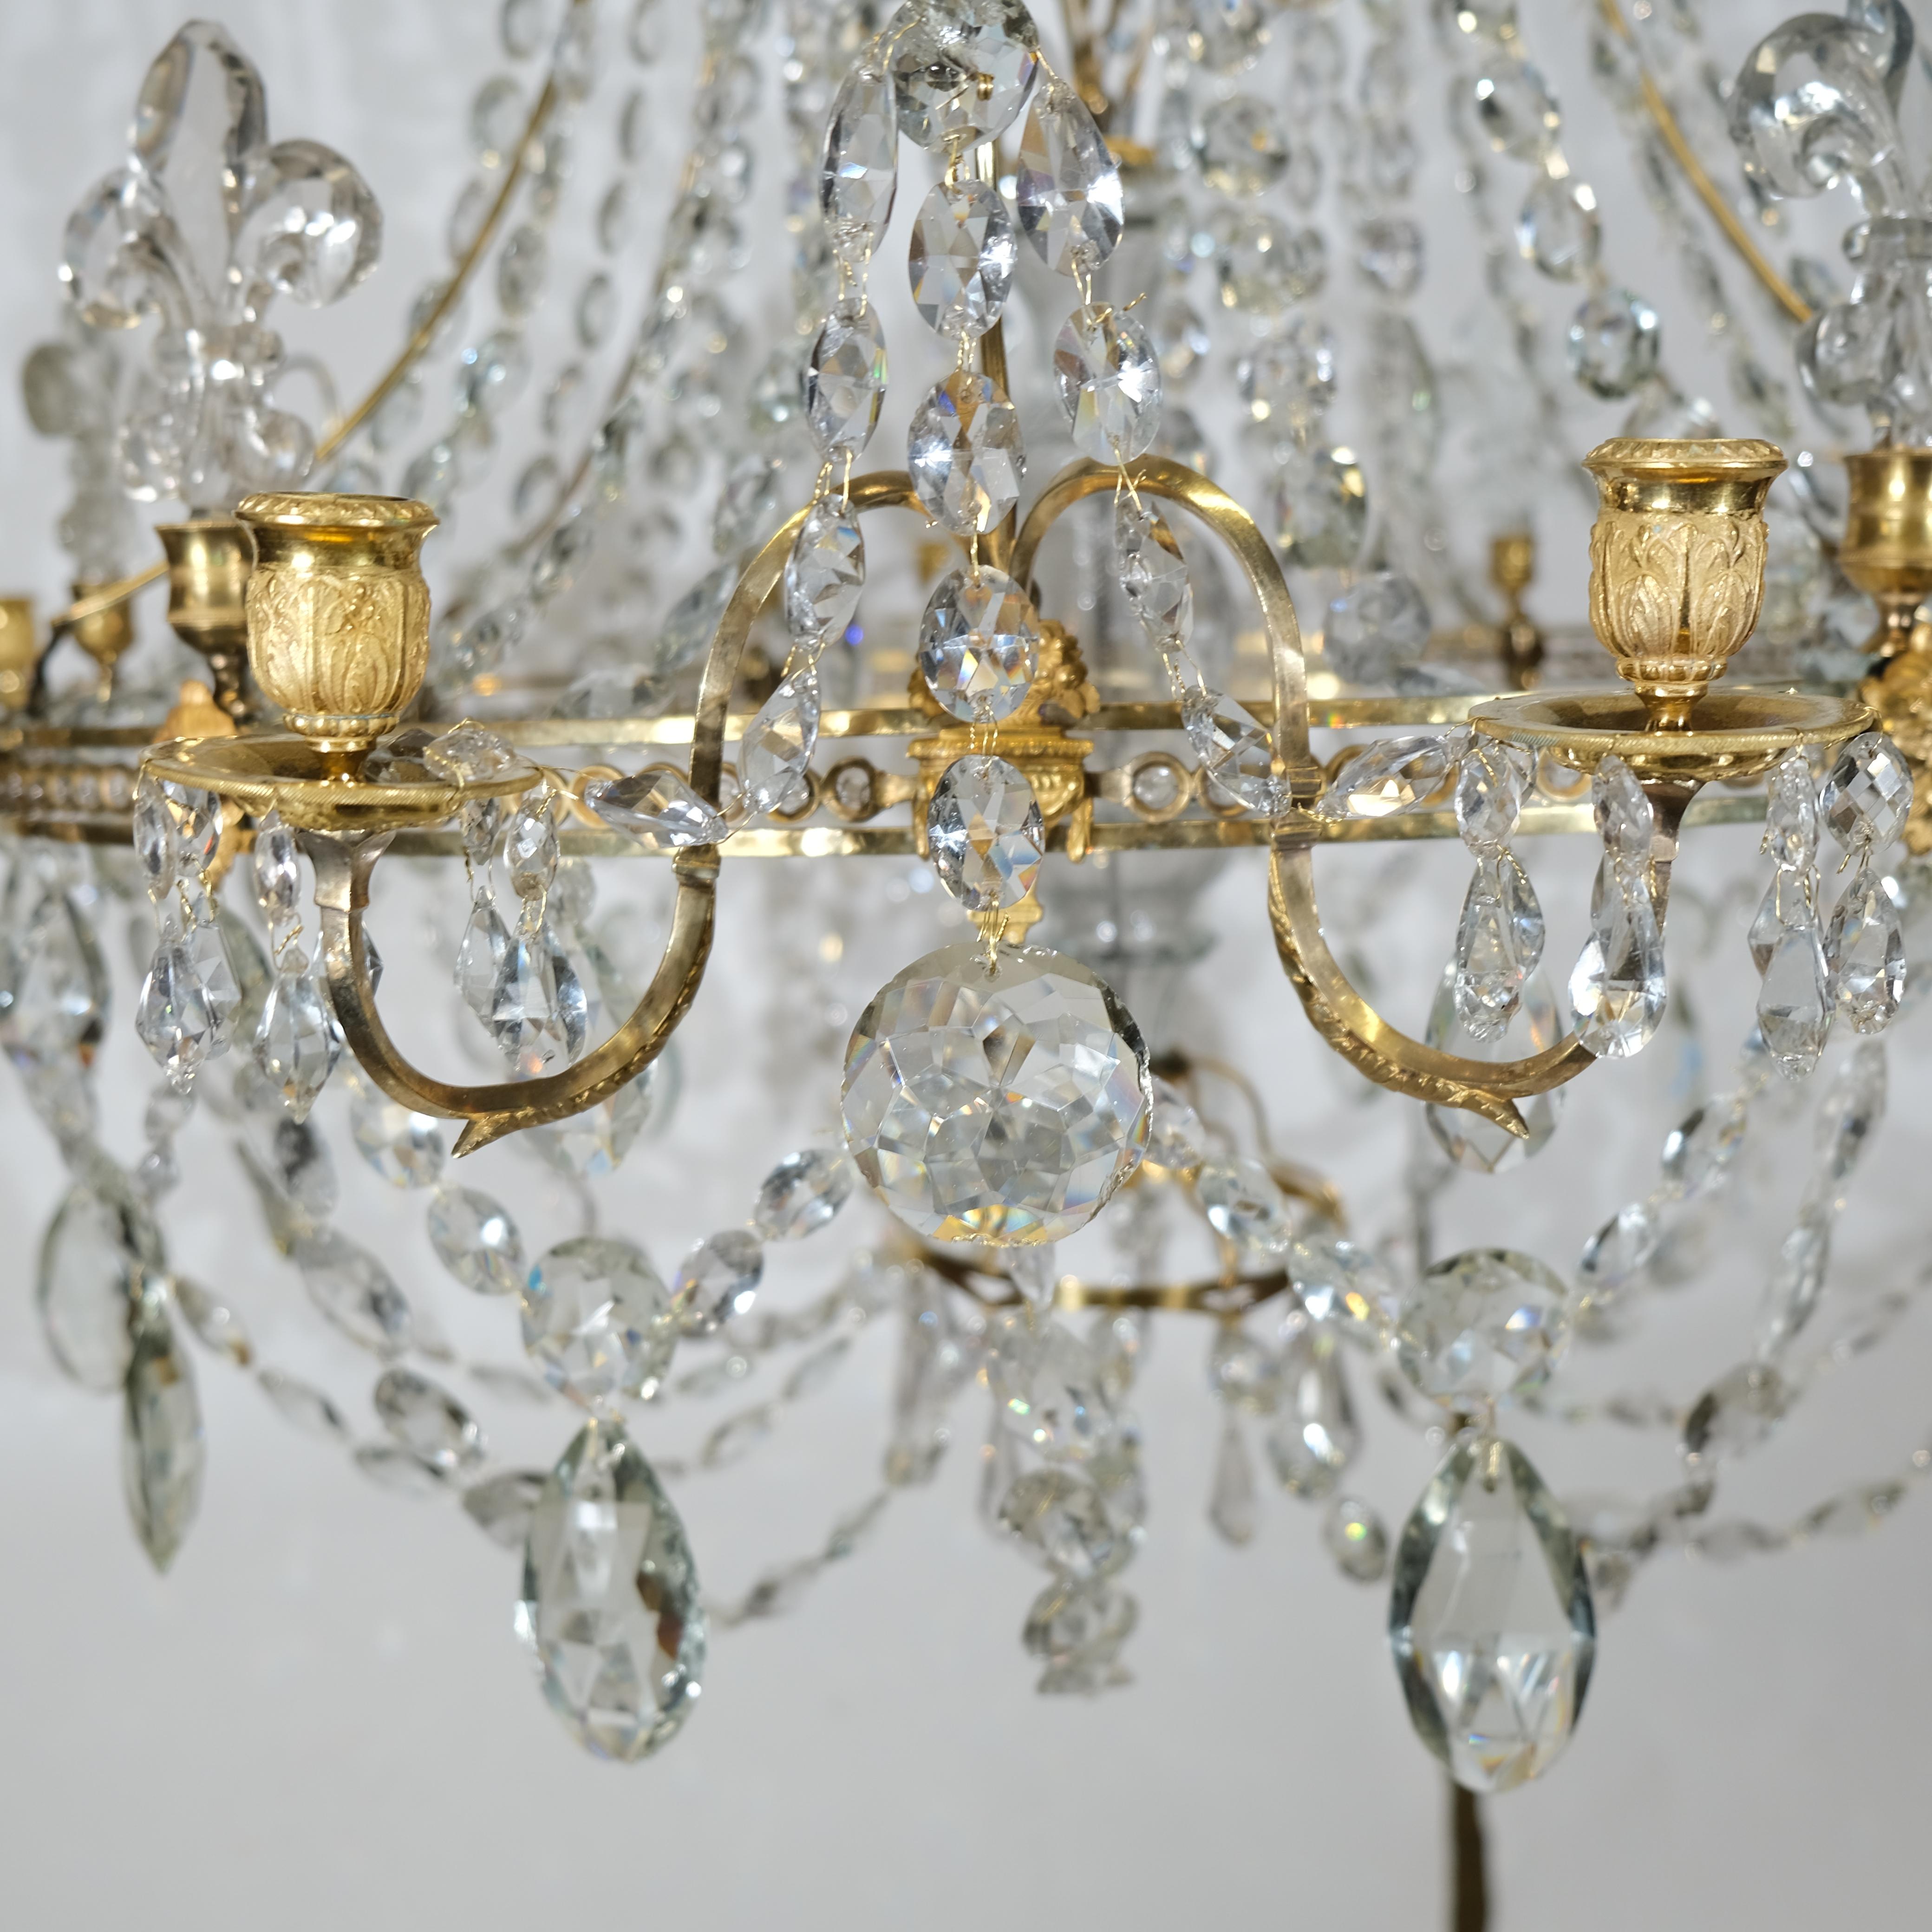 Magnificent Antique Important and large 18th c chandelier For Sale 5